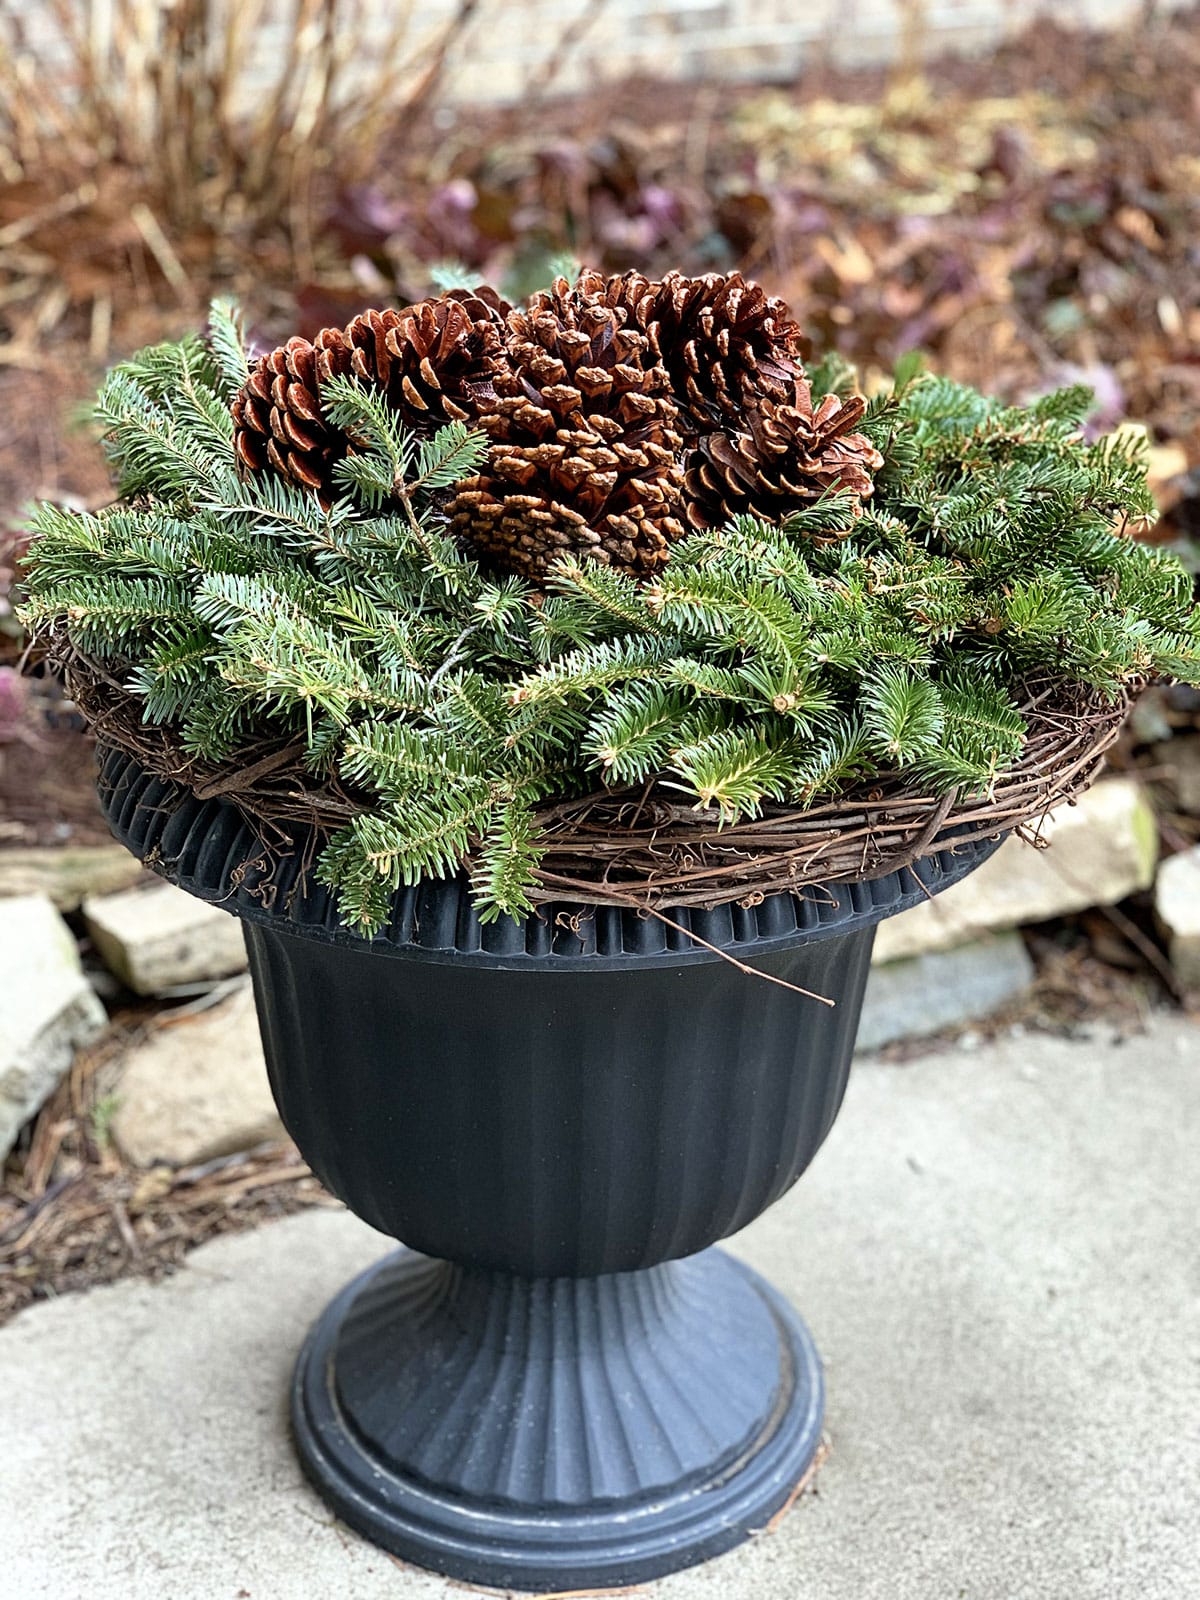 Winter porch pot for the holidays using pine cones, grapevine wreath and an inexpensive fresh greenery christmas wreath.